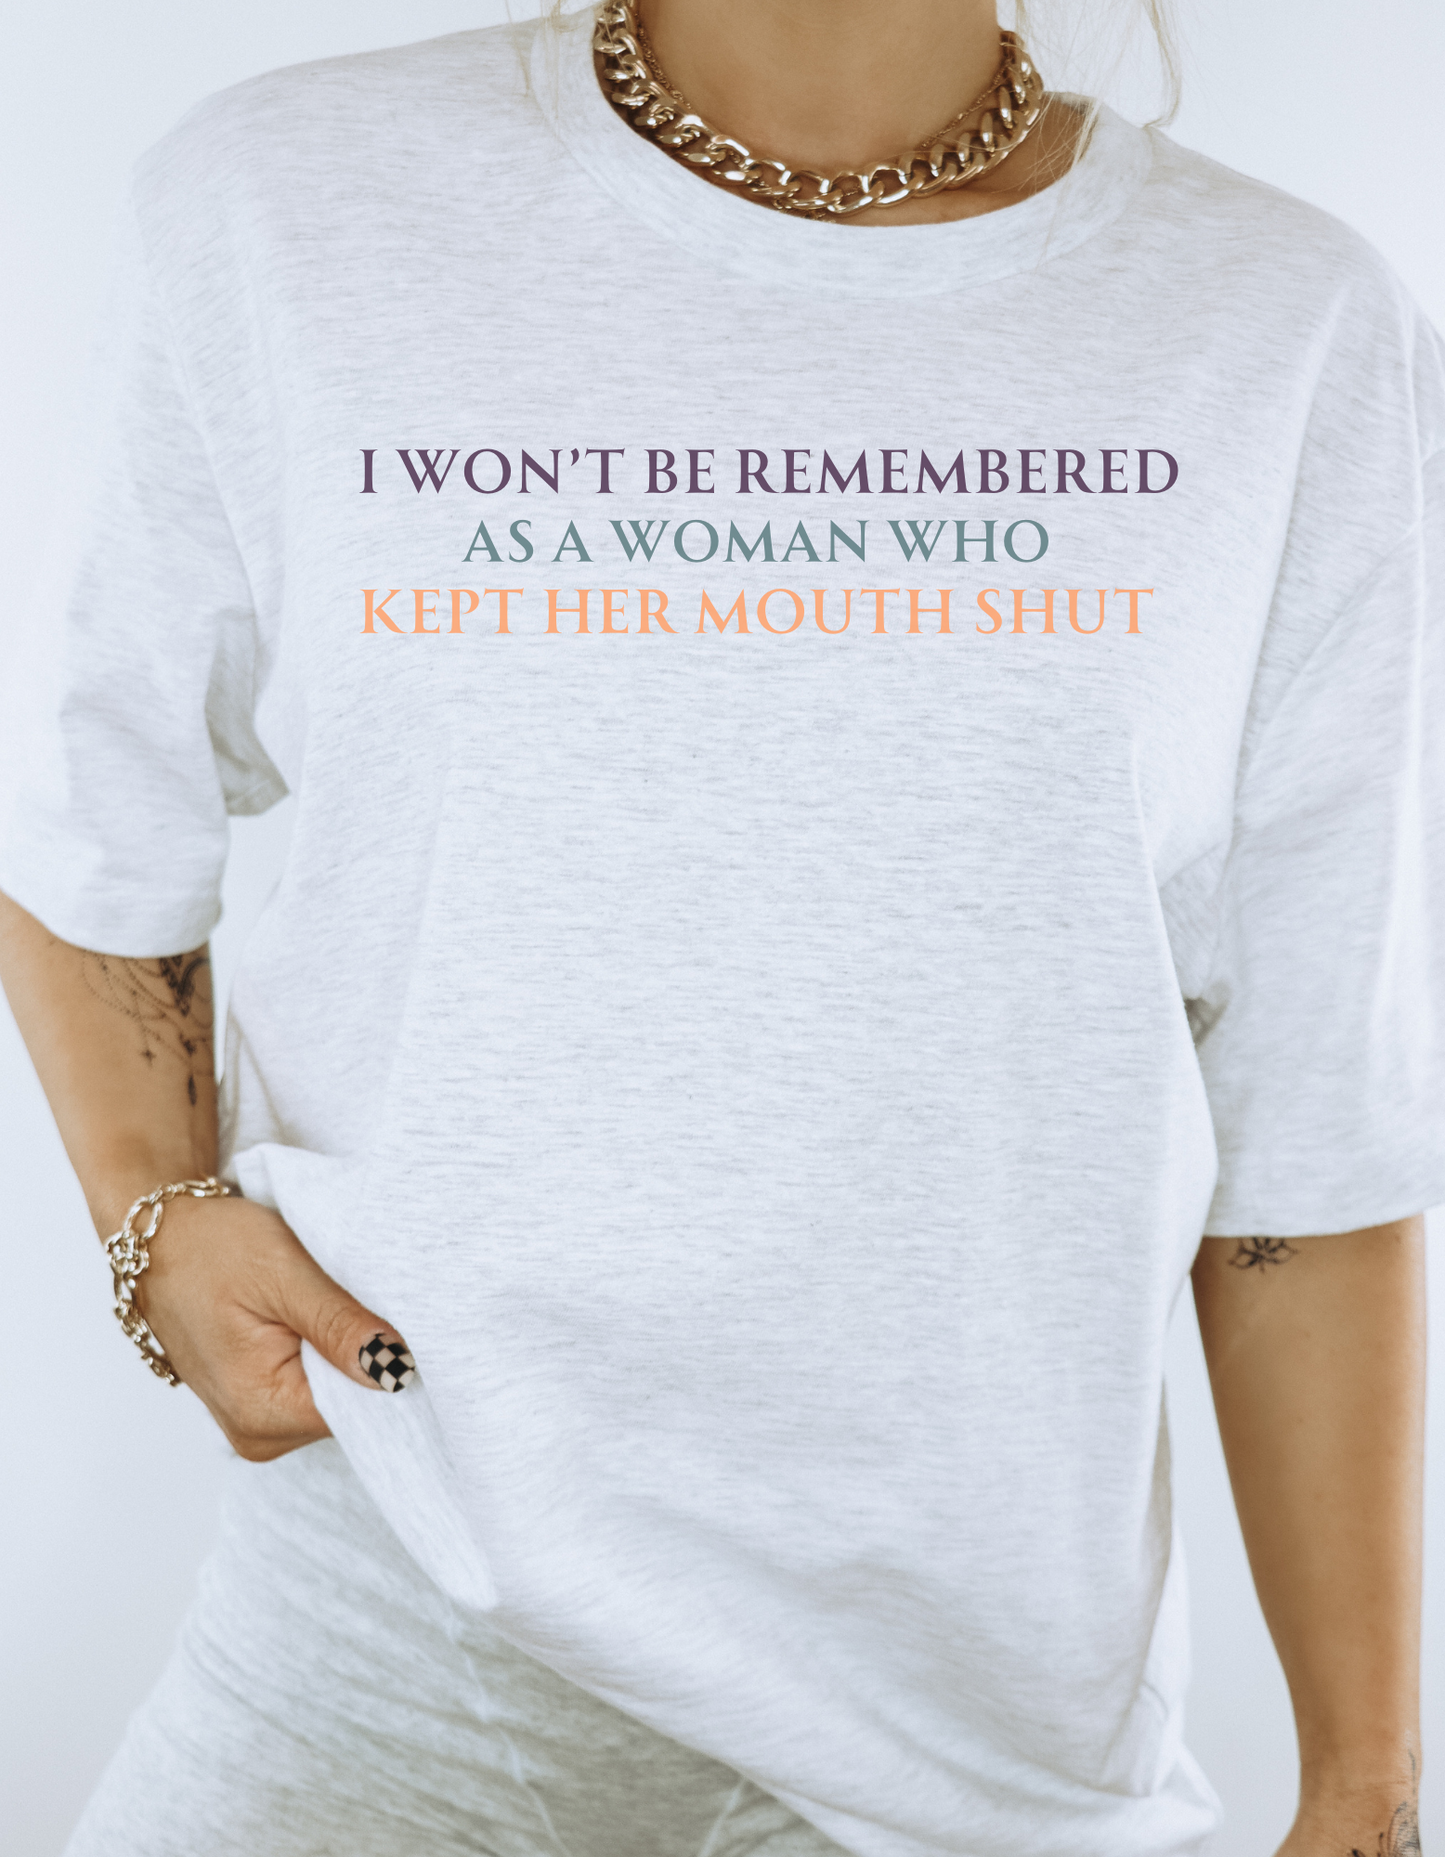 I won't be remembered as a woman who kept her mouth shut - tshirt